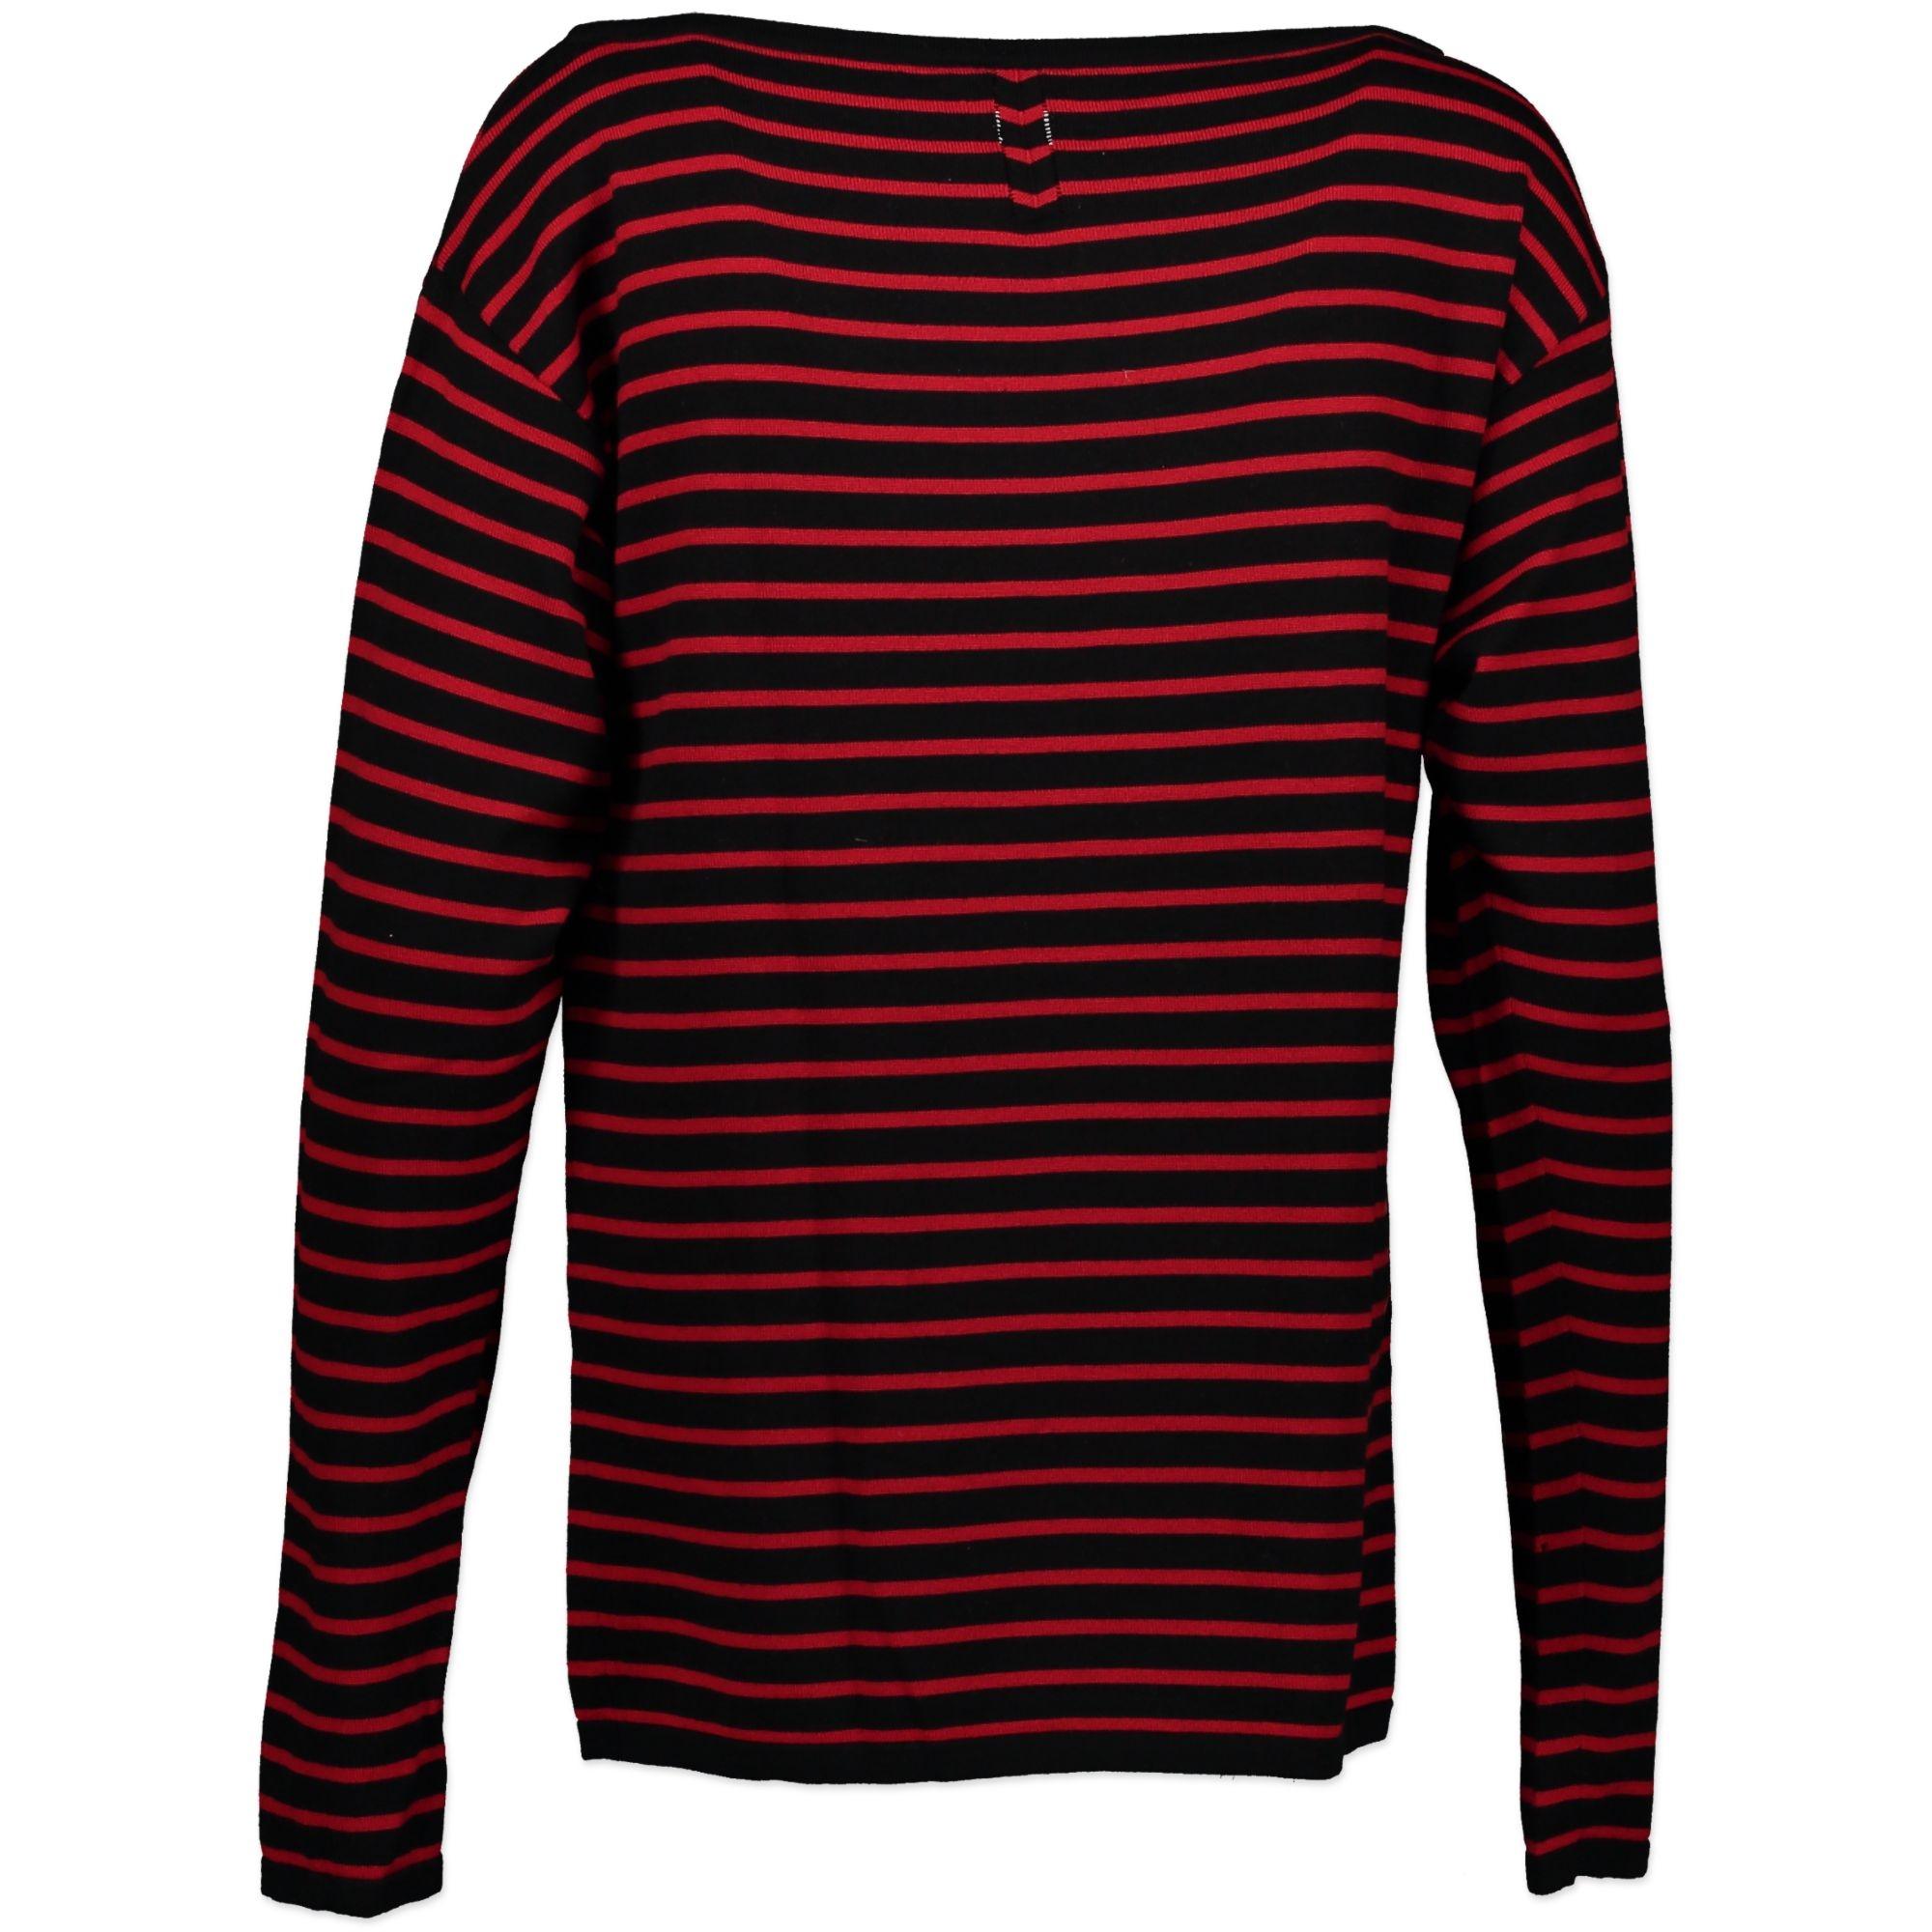 Very good condition

Saint Laurent Wool Striped Top - size XS

This Saint Laurent longsleeve wool top is a classic piece in the collection. The black and red striped give a rock & roll vibe, the boat neck elongates and creates an elegant